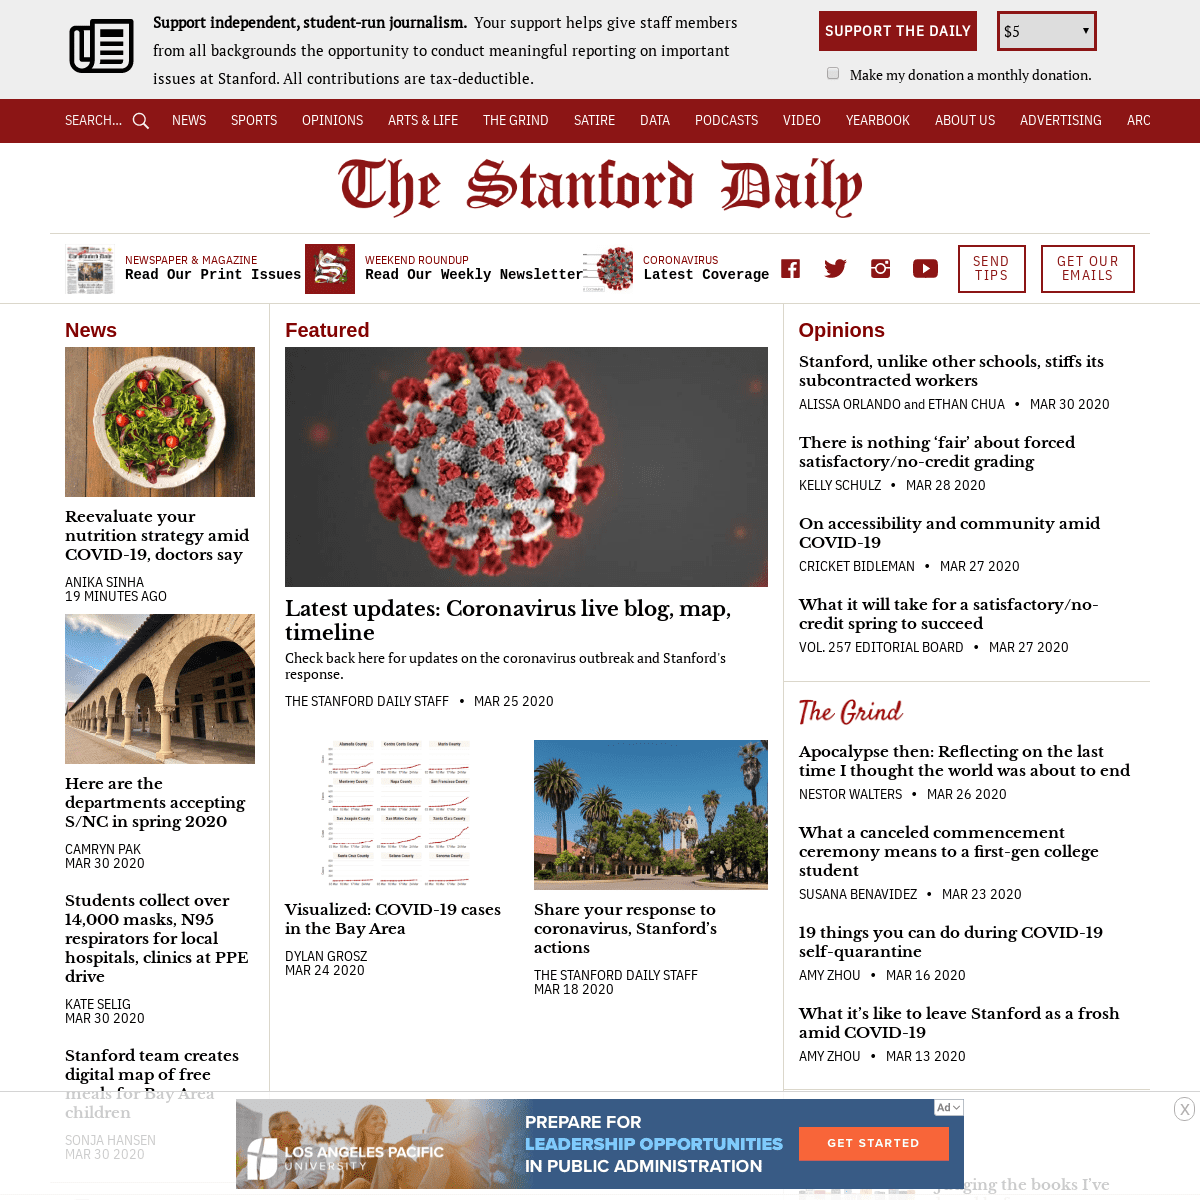 A complete backup of stanforddaily.com